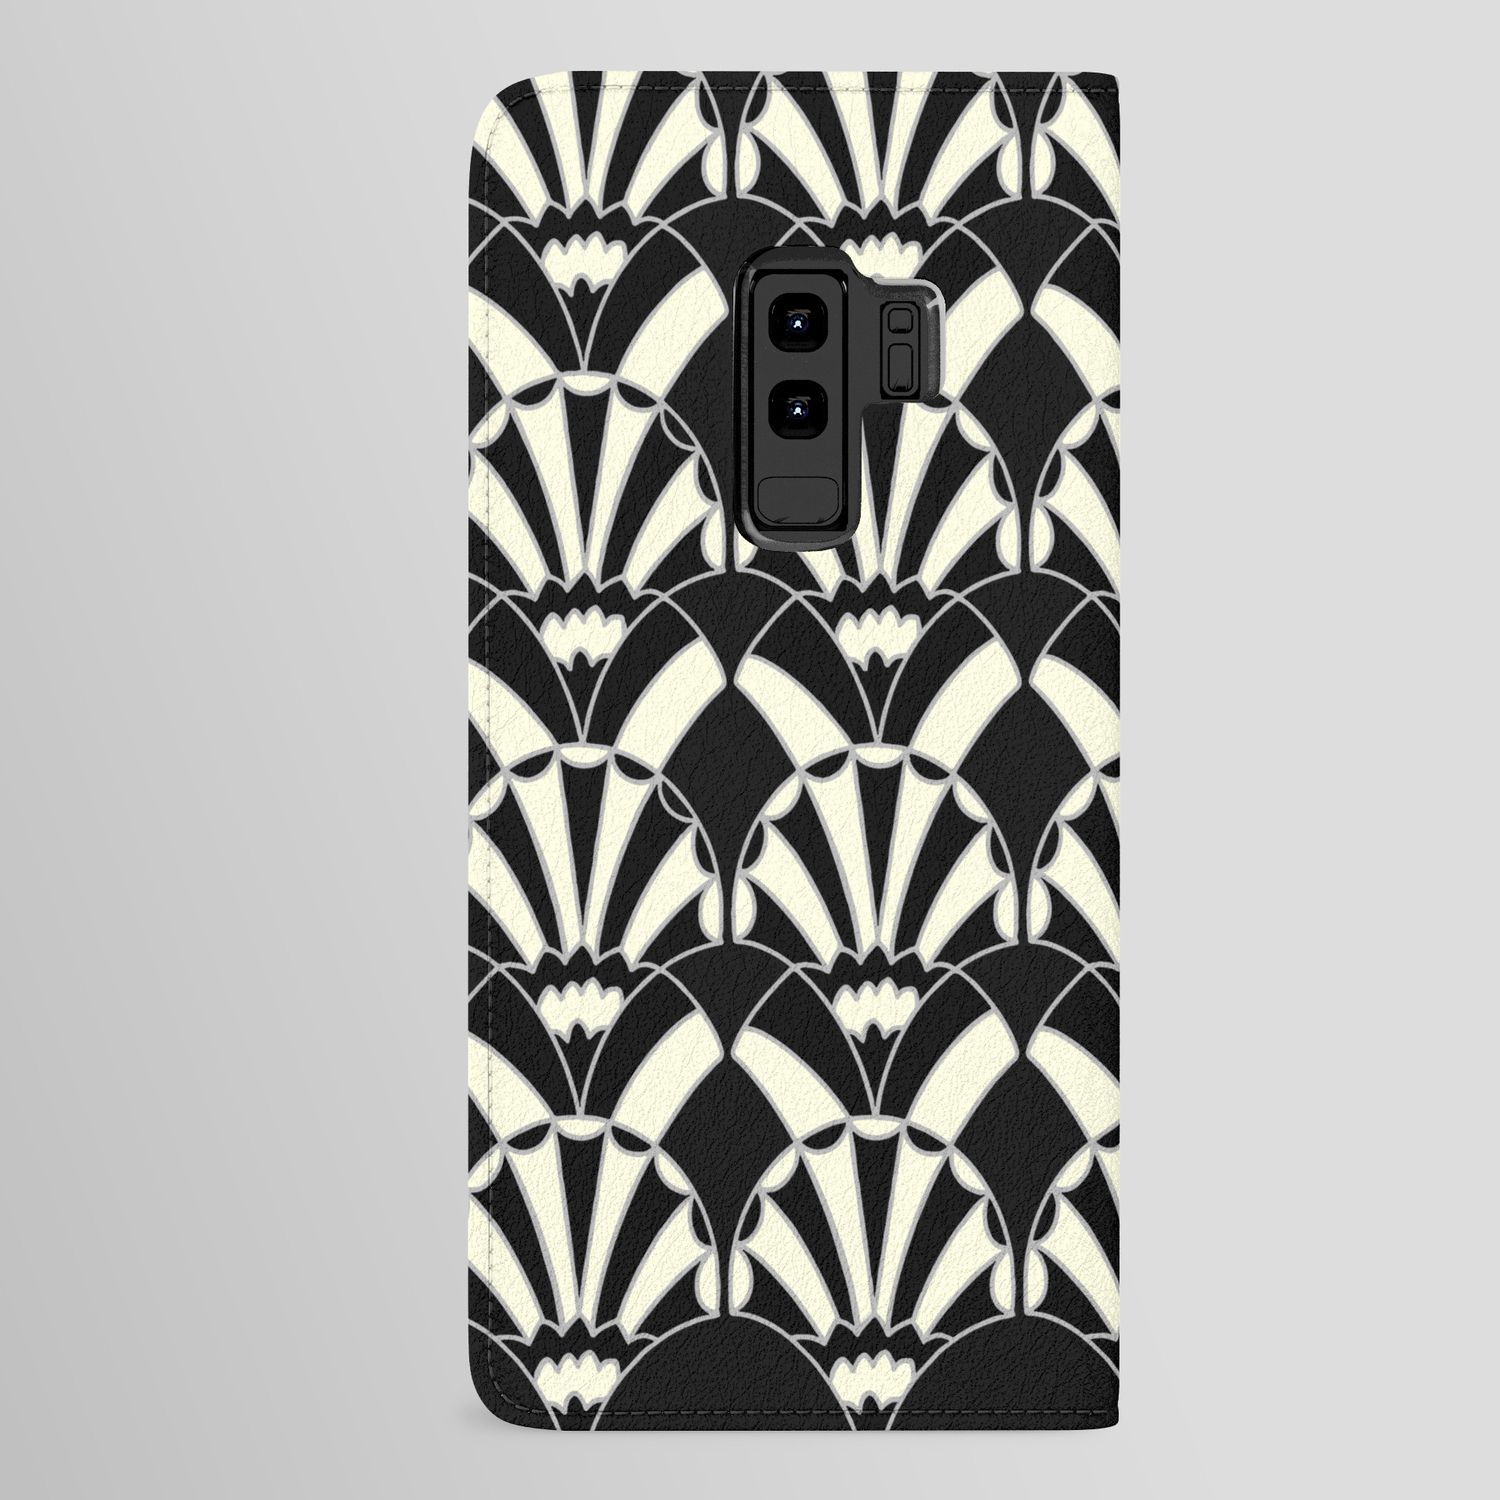 Art Deco Android Phone Wallpapers